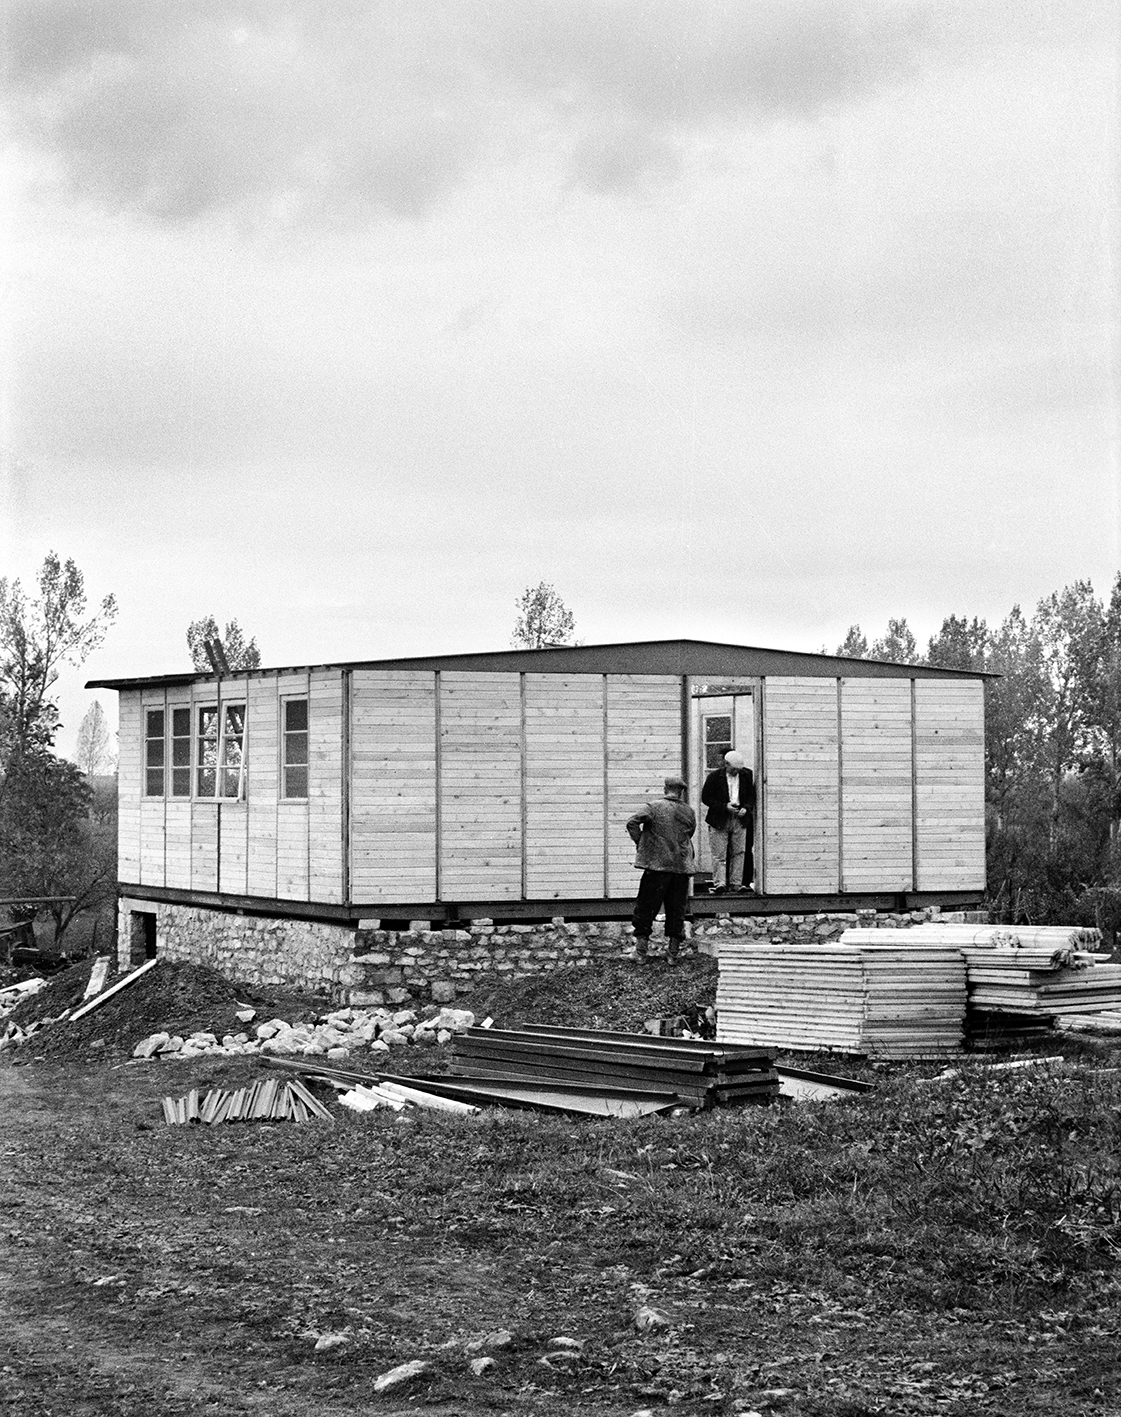 Assembly of houses 8 x 8 m. Partial view of the housing development with portal frame buildings from the Ateliers Jean Prouvé, Bezaumont, fall 1945.